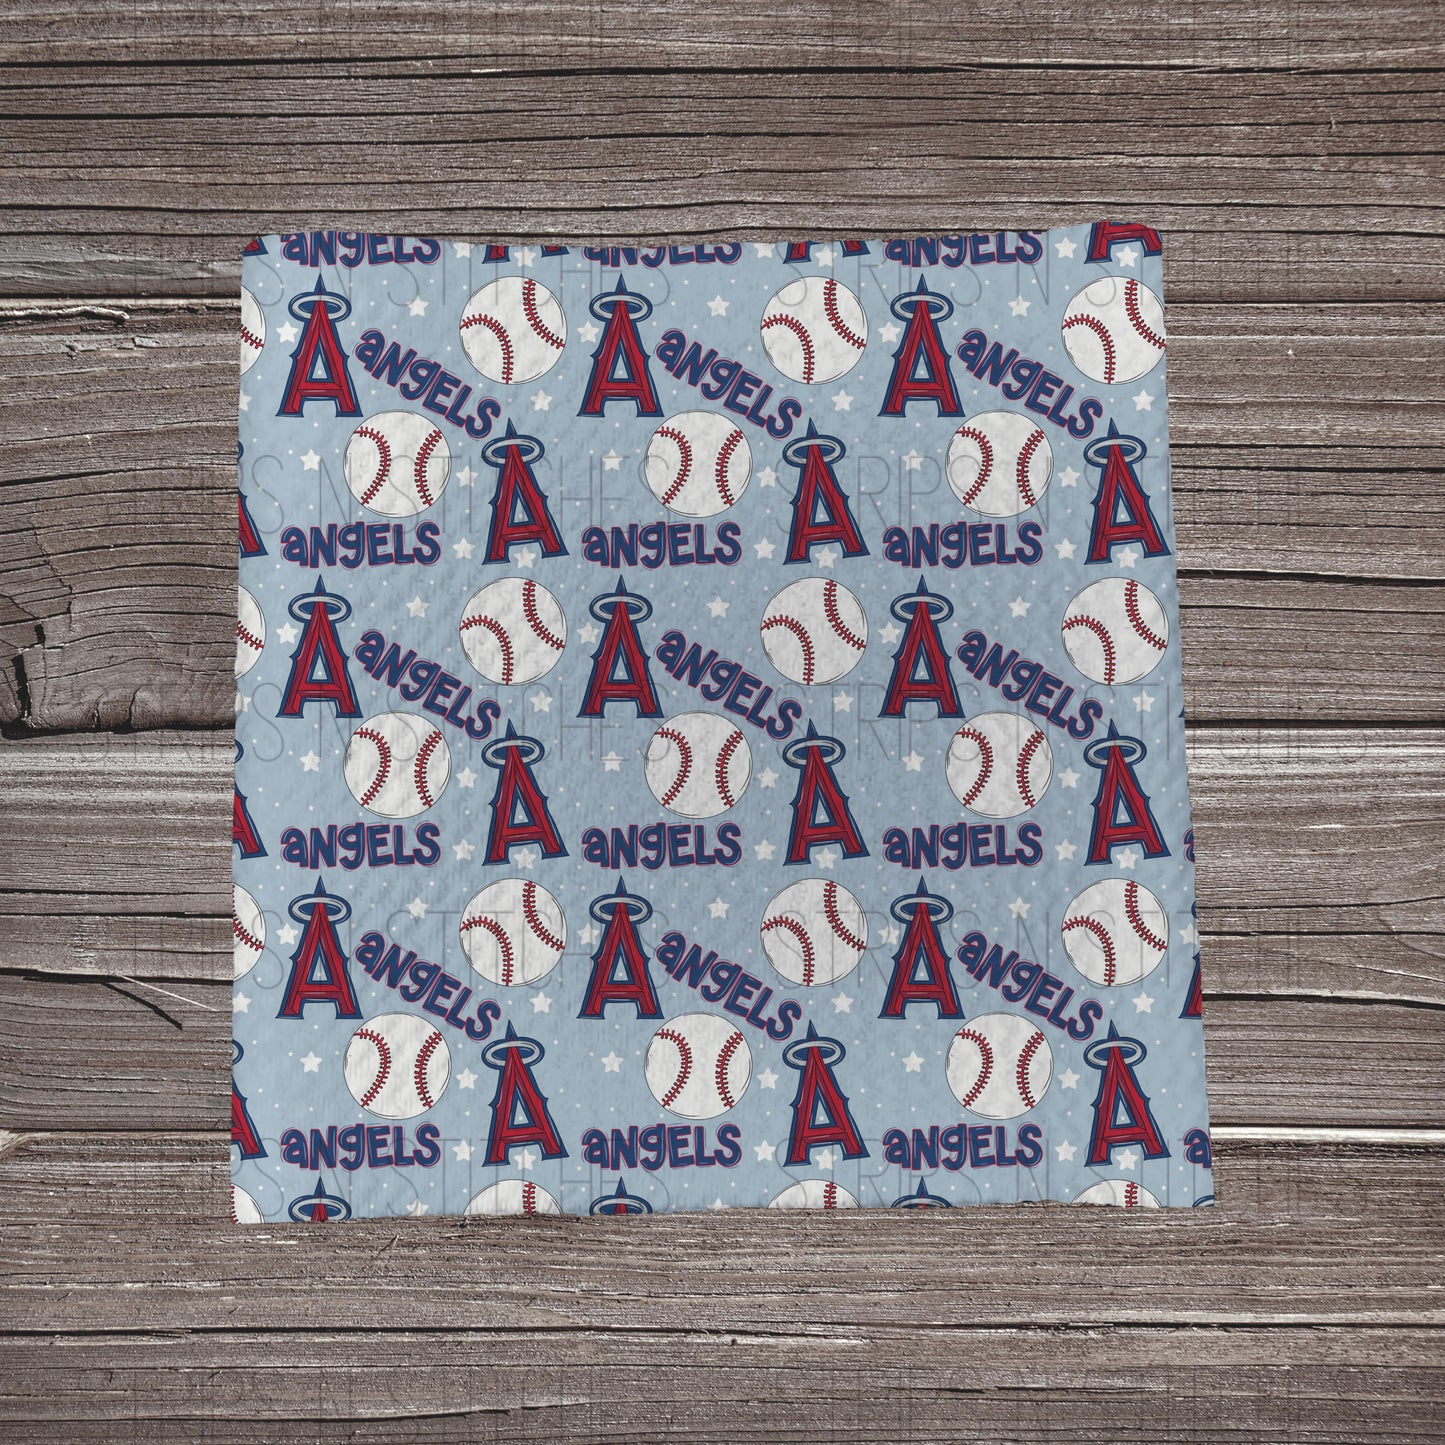 MLB STARS| All 30 Teams Available | Fabric Strip- Bow Making- Headwrap- Scrunchies